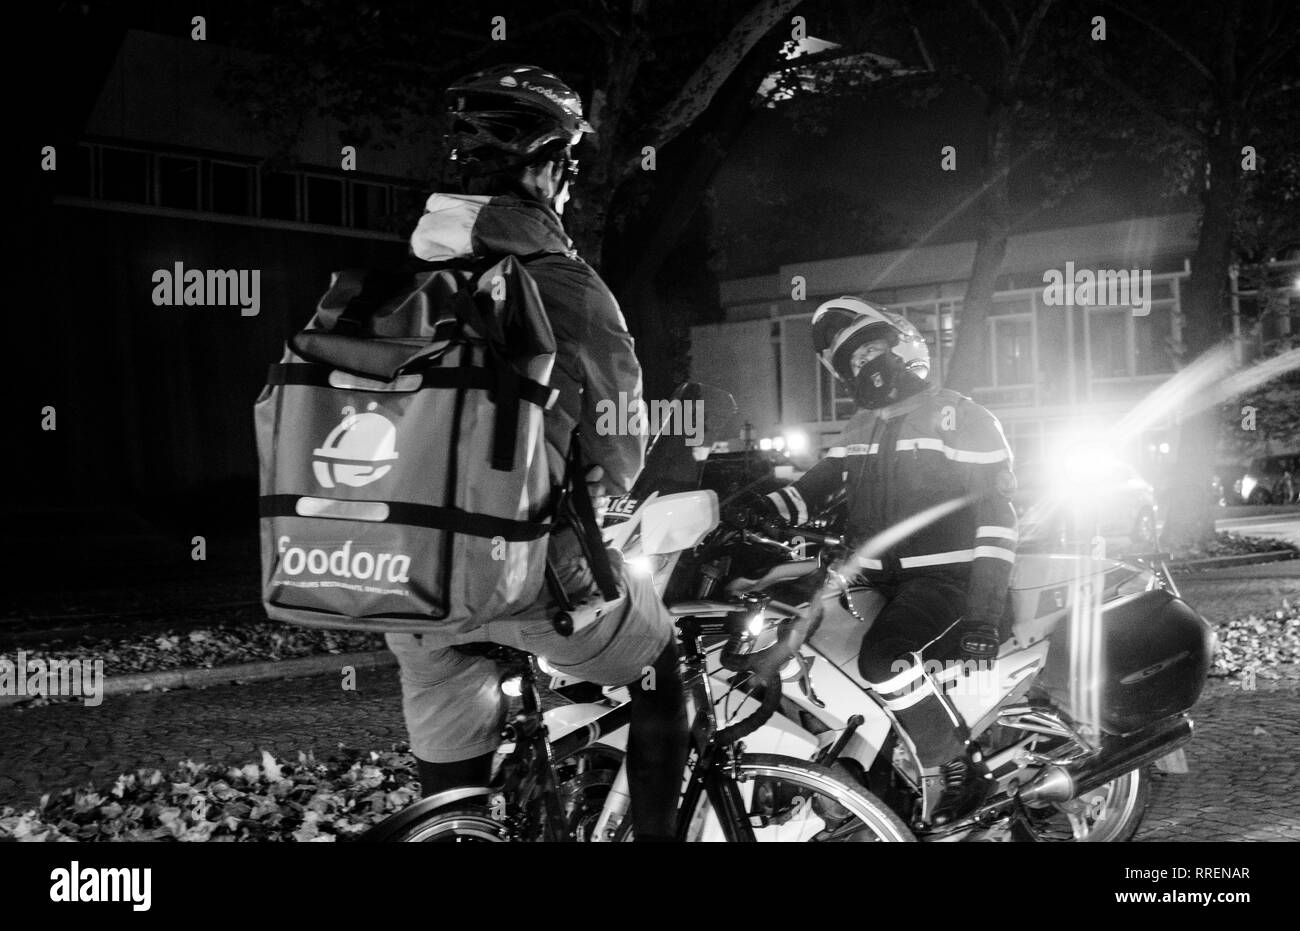 Strasbourg, France - Oct 27, 2018: Police officer blocking the street - Foodora cyclist delivering food waiting due to official delegation visit - black and white Stock Photo